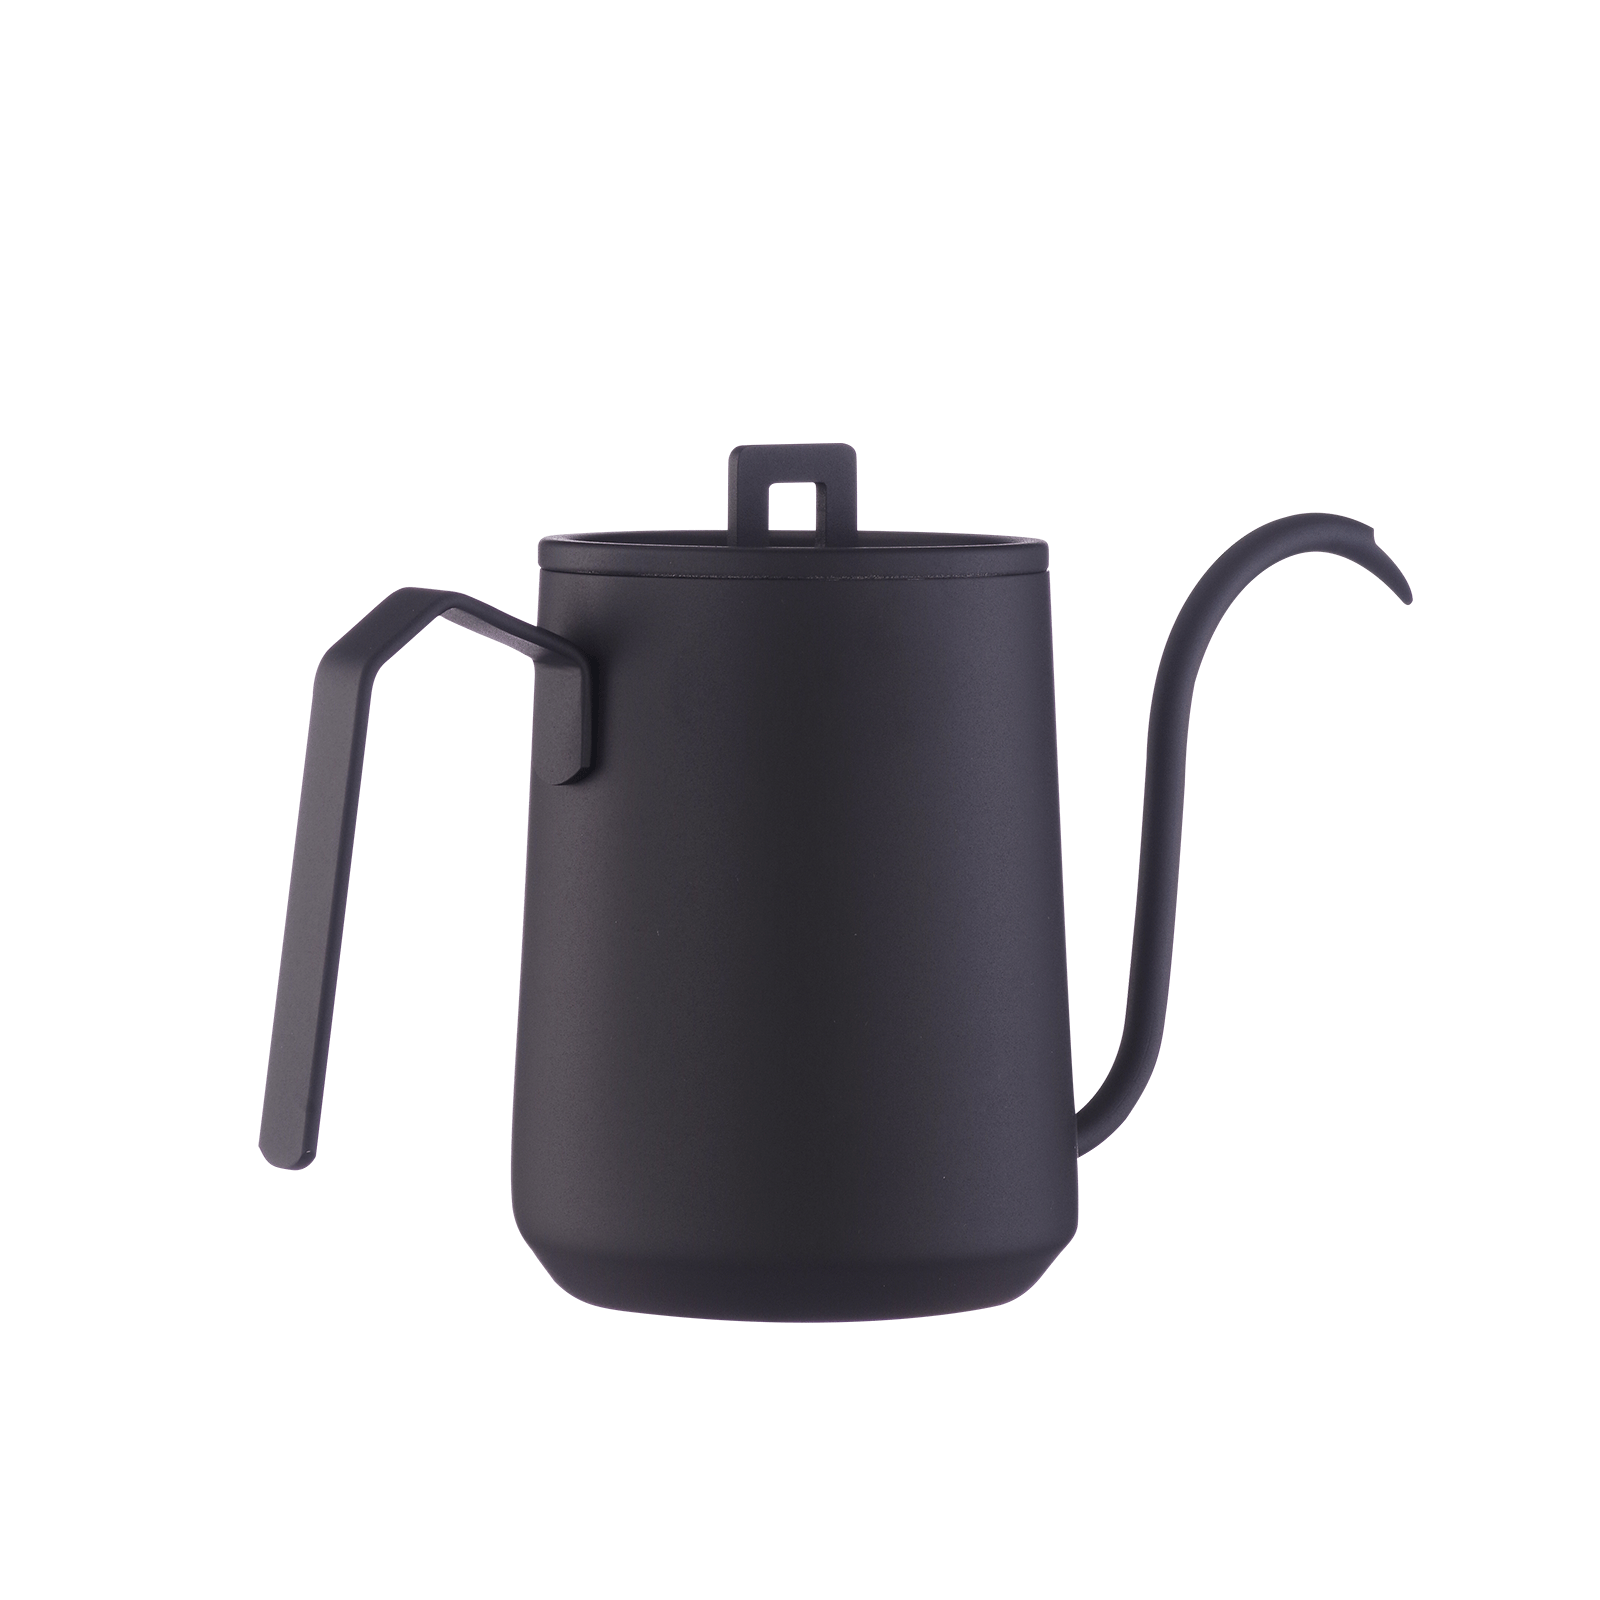 Unbreakable Gooseneck Kettle for Drip Coffee 20oz Pour Over Coffee Kettle Tea Kettle for Stove Top,600ml/20oz Glass Coffee Kettle with Lid,Water